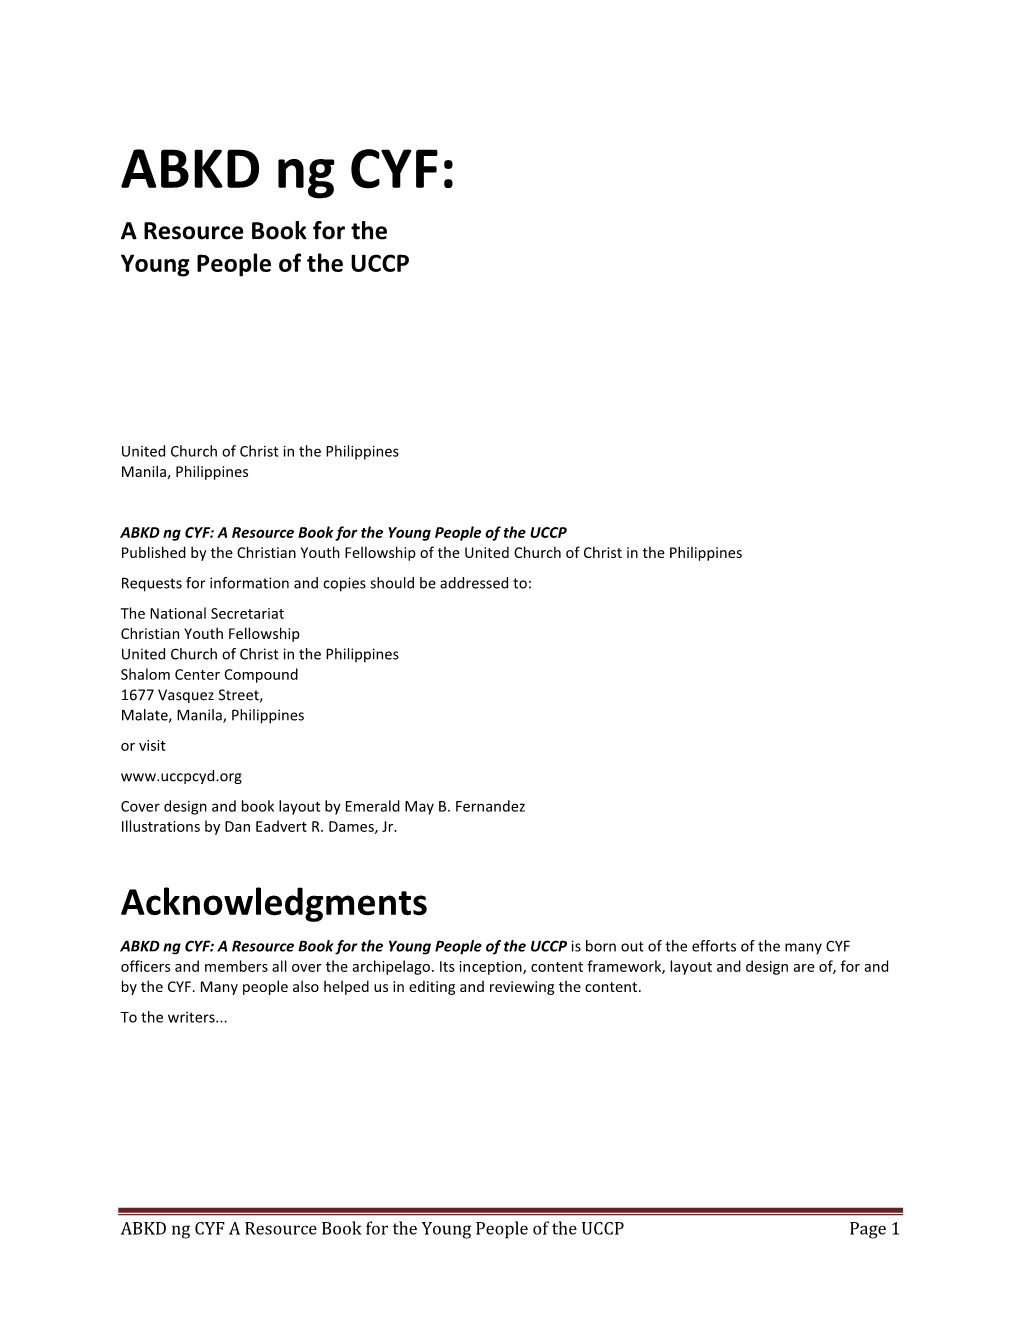 ABKD Ng CYF: a Resource Book for the Young People of the UCCP